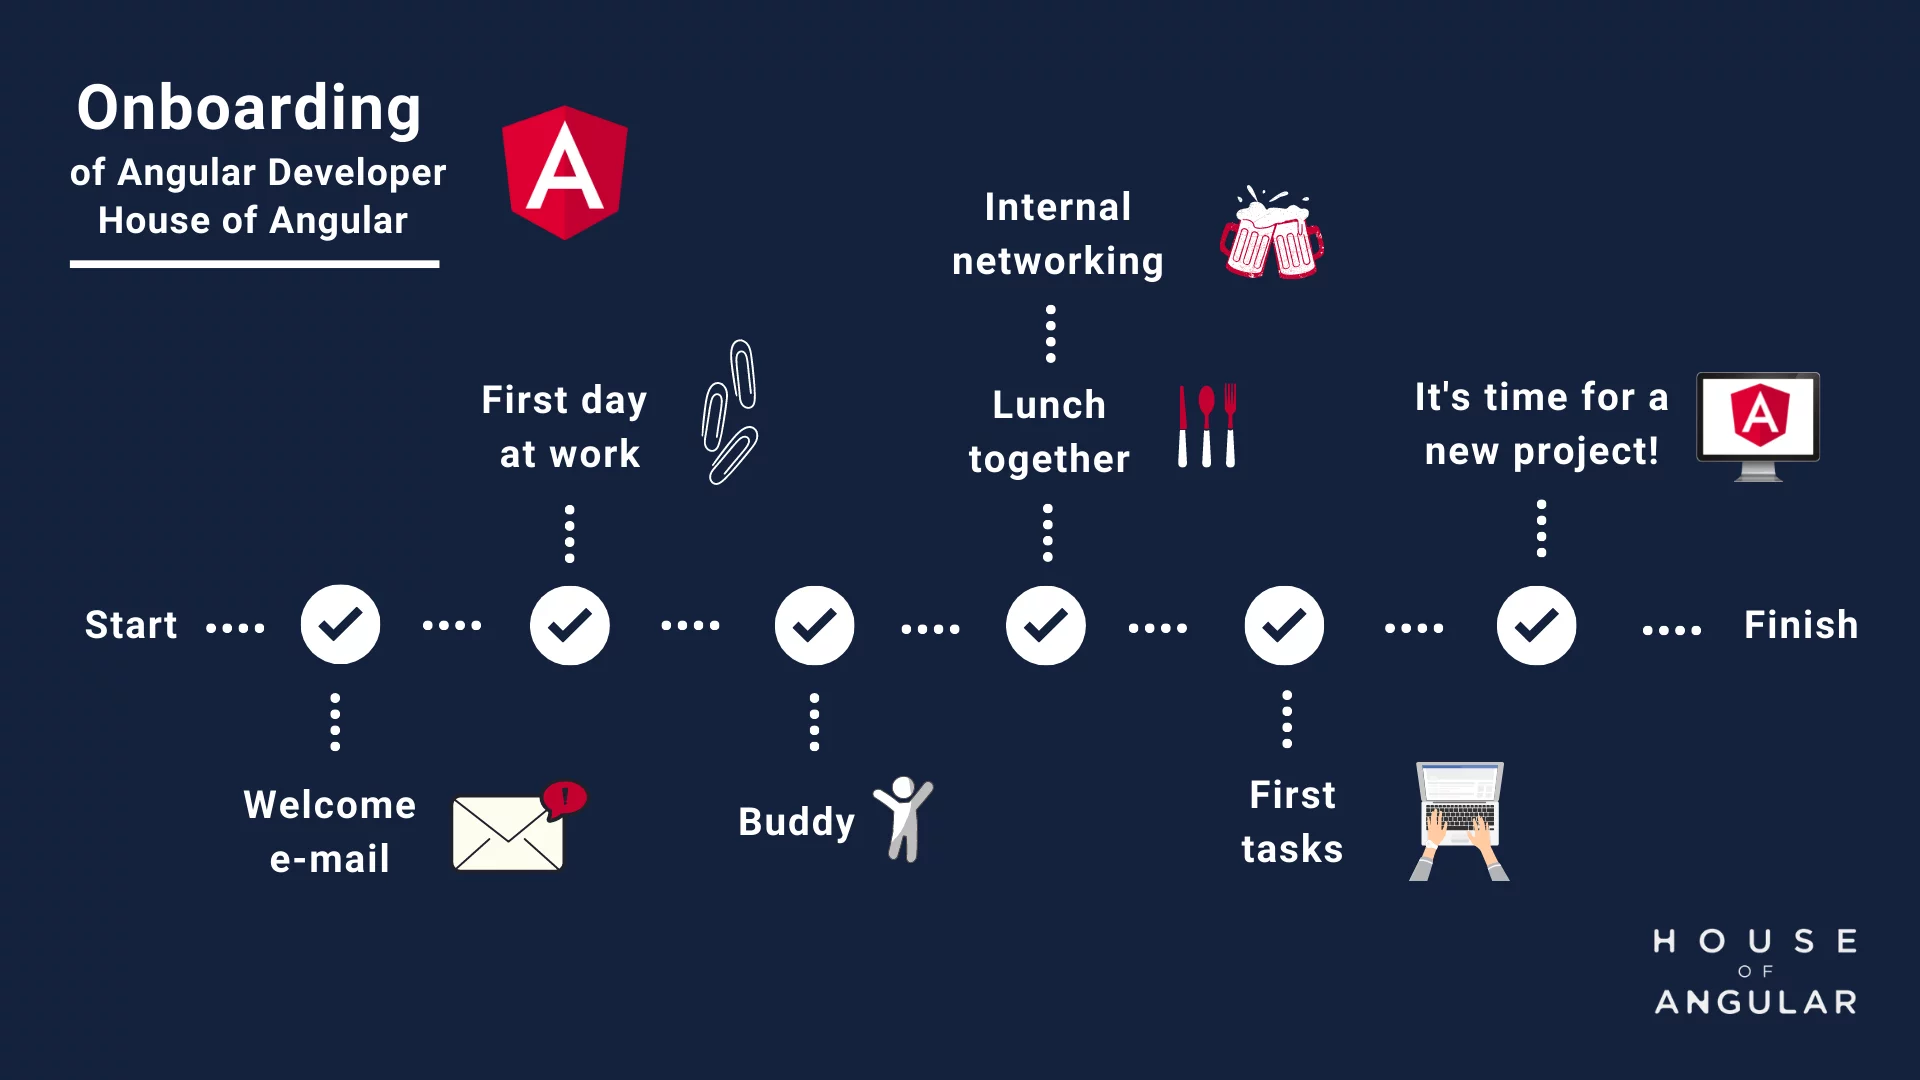 The onboarding process starts with a welcome e-mail. On the first day at work, an Angular developer gets his buddy. This is followed by internal networking and lunch with the buddy. At the end of the process, the first tasks are introduced and the new project begins. 